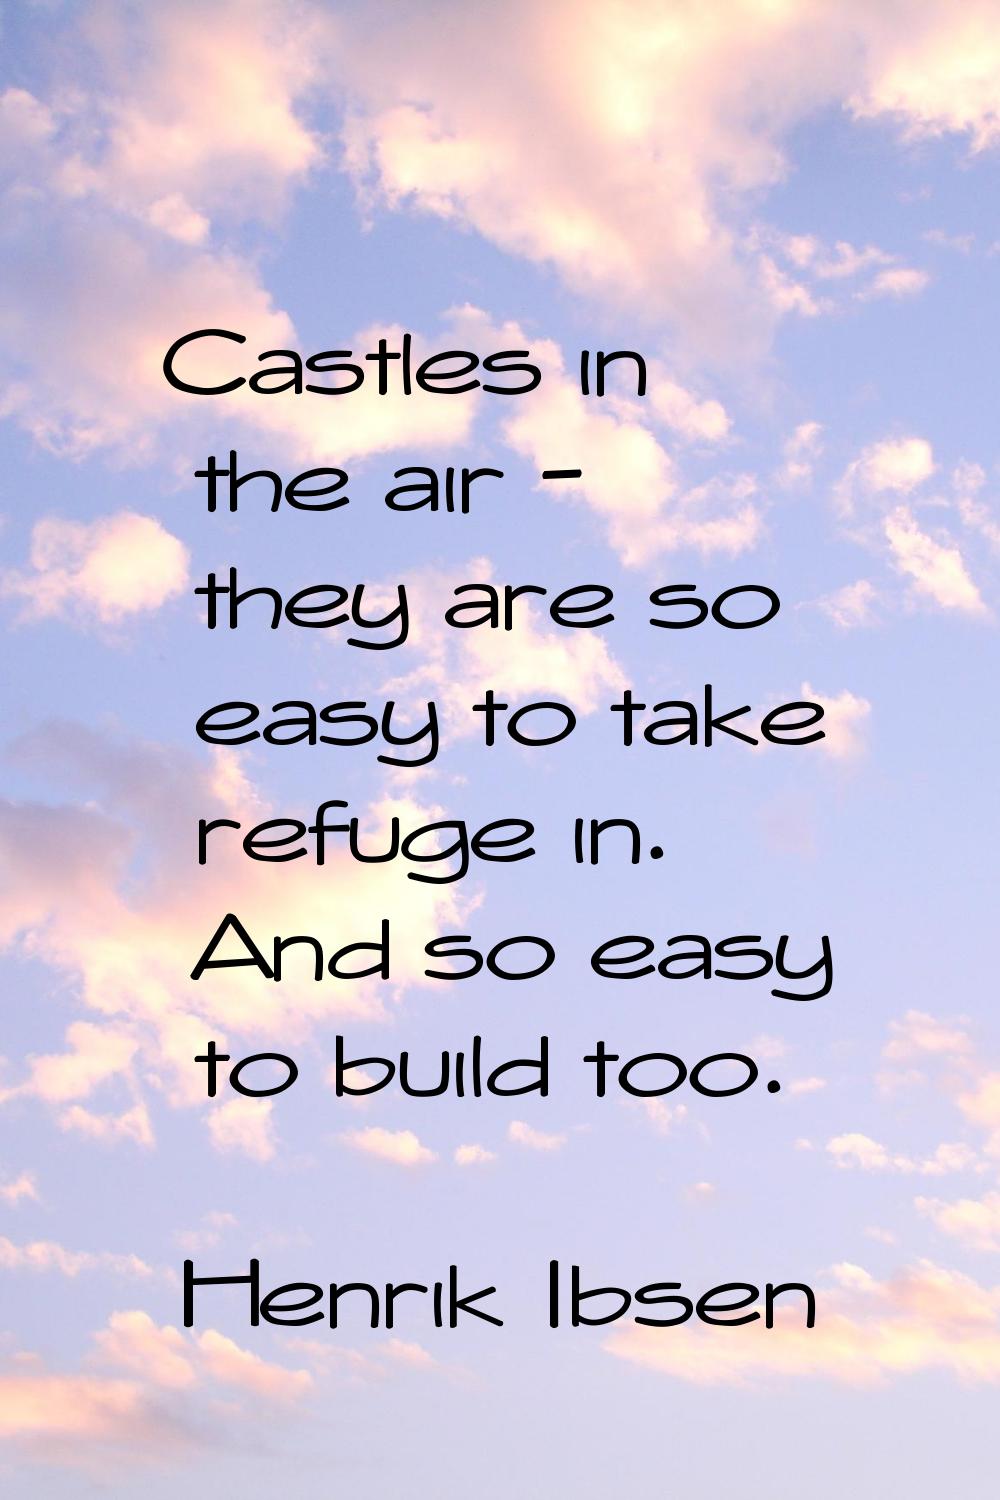 Castles in the air - they are so easy to take refuge in. And so easy to build too.